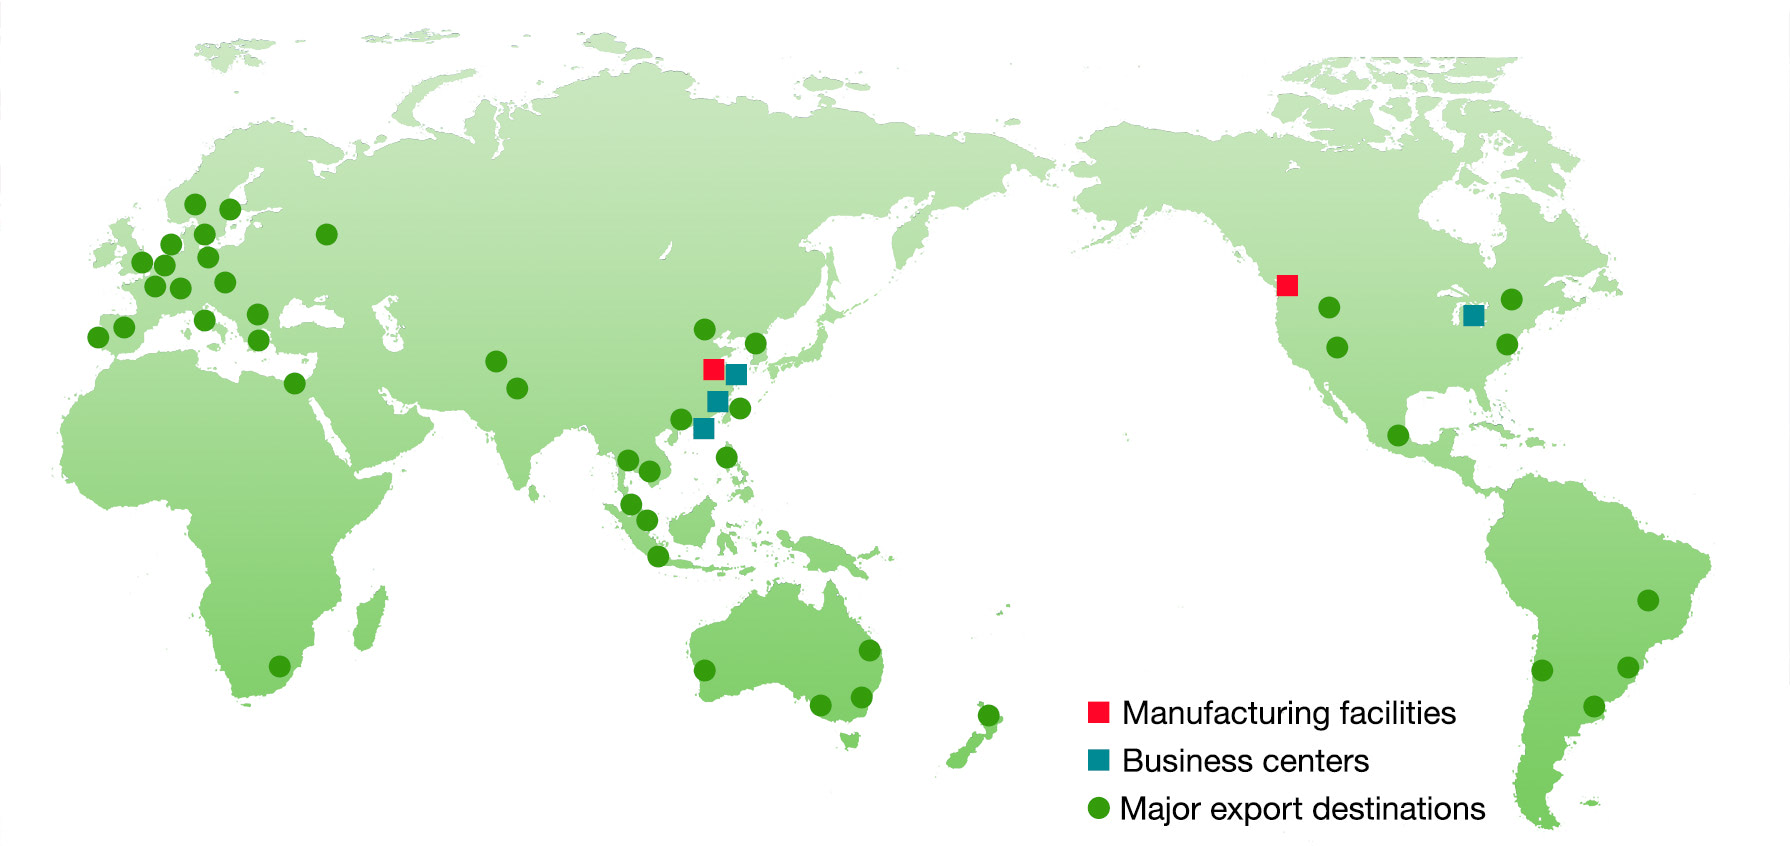 Achilles businesses are active around the world